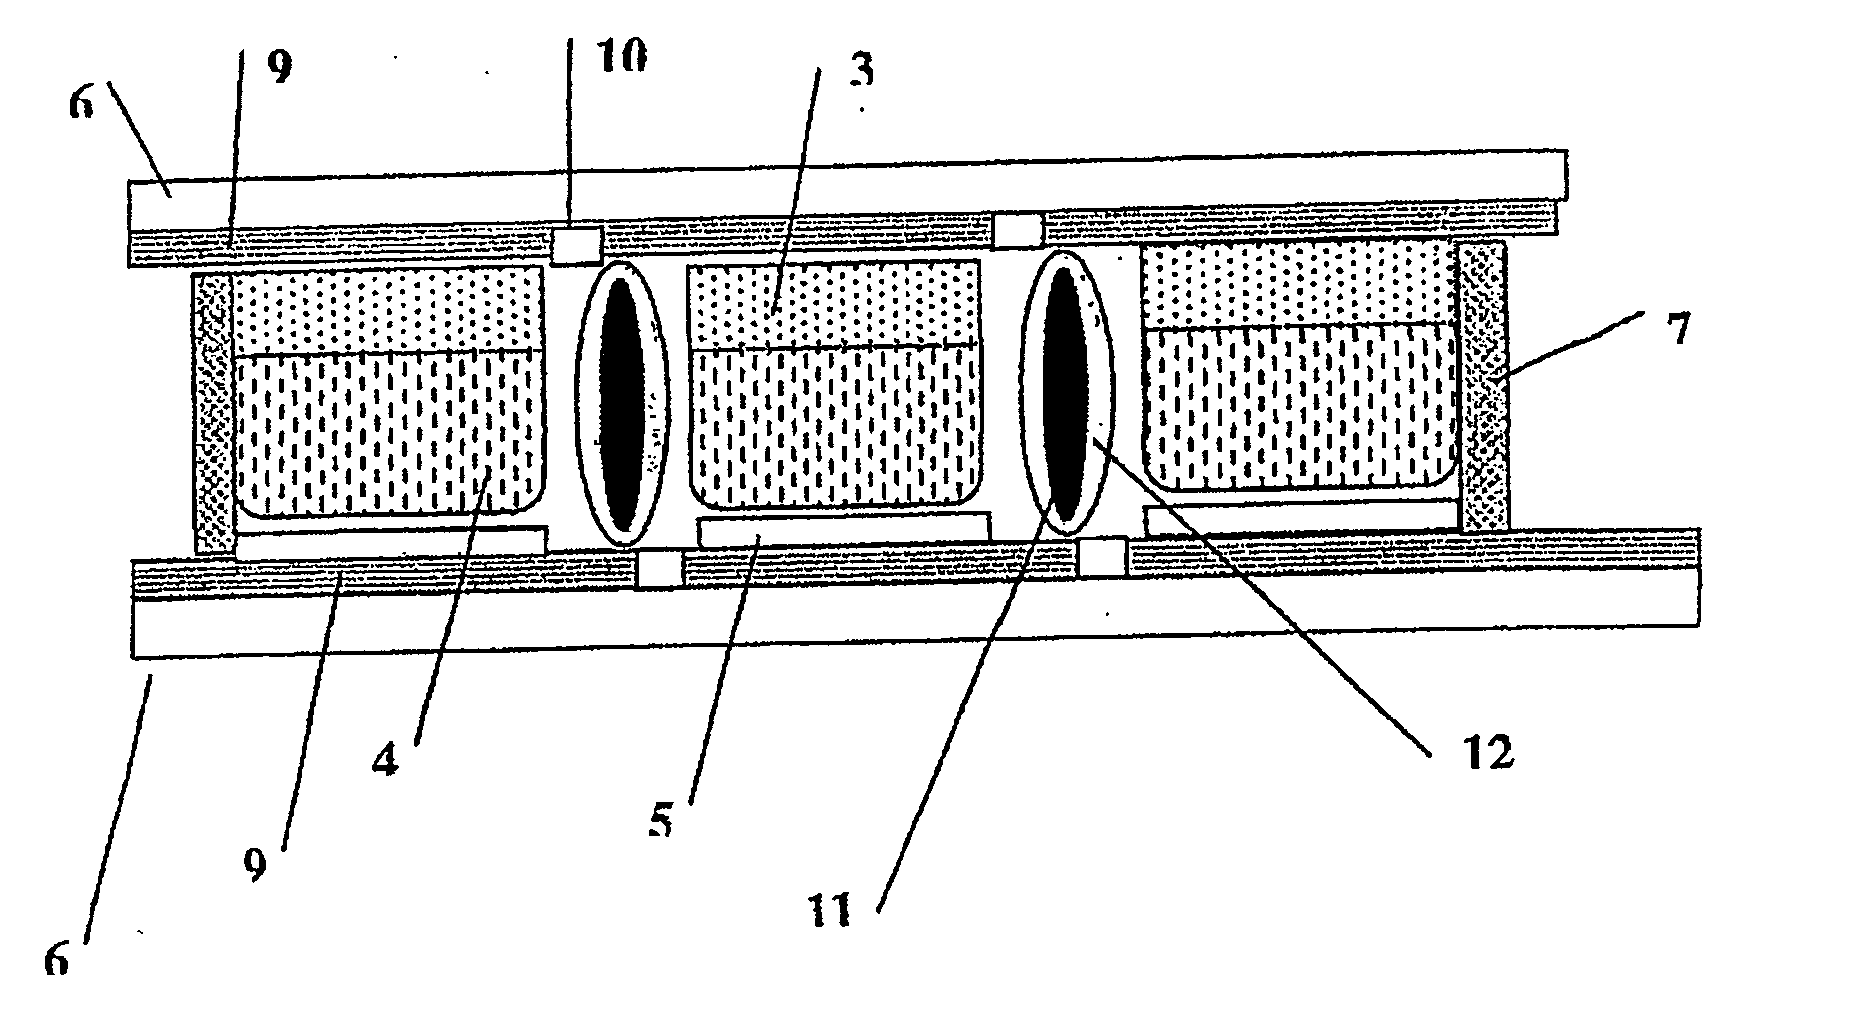 Photoelectrochemical device